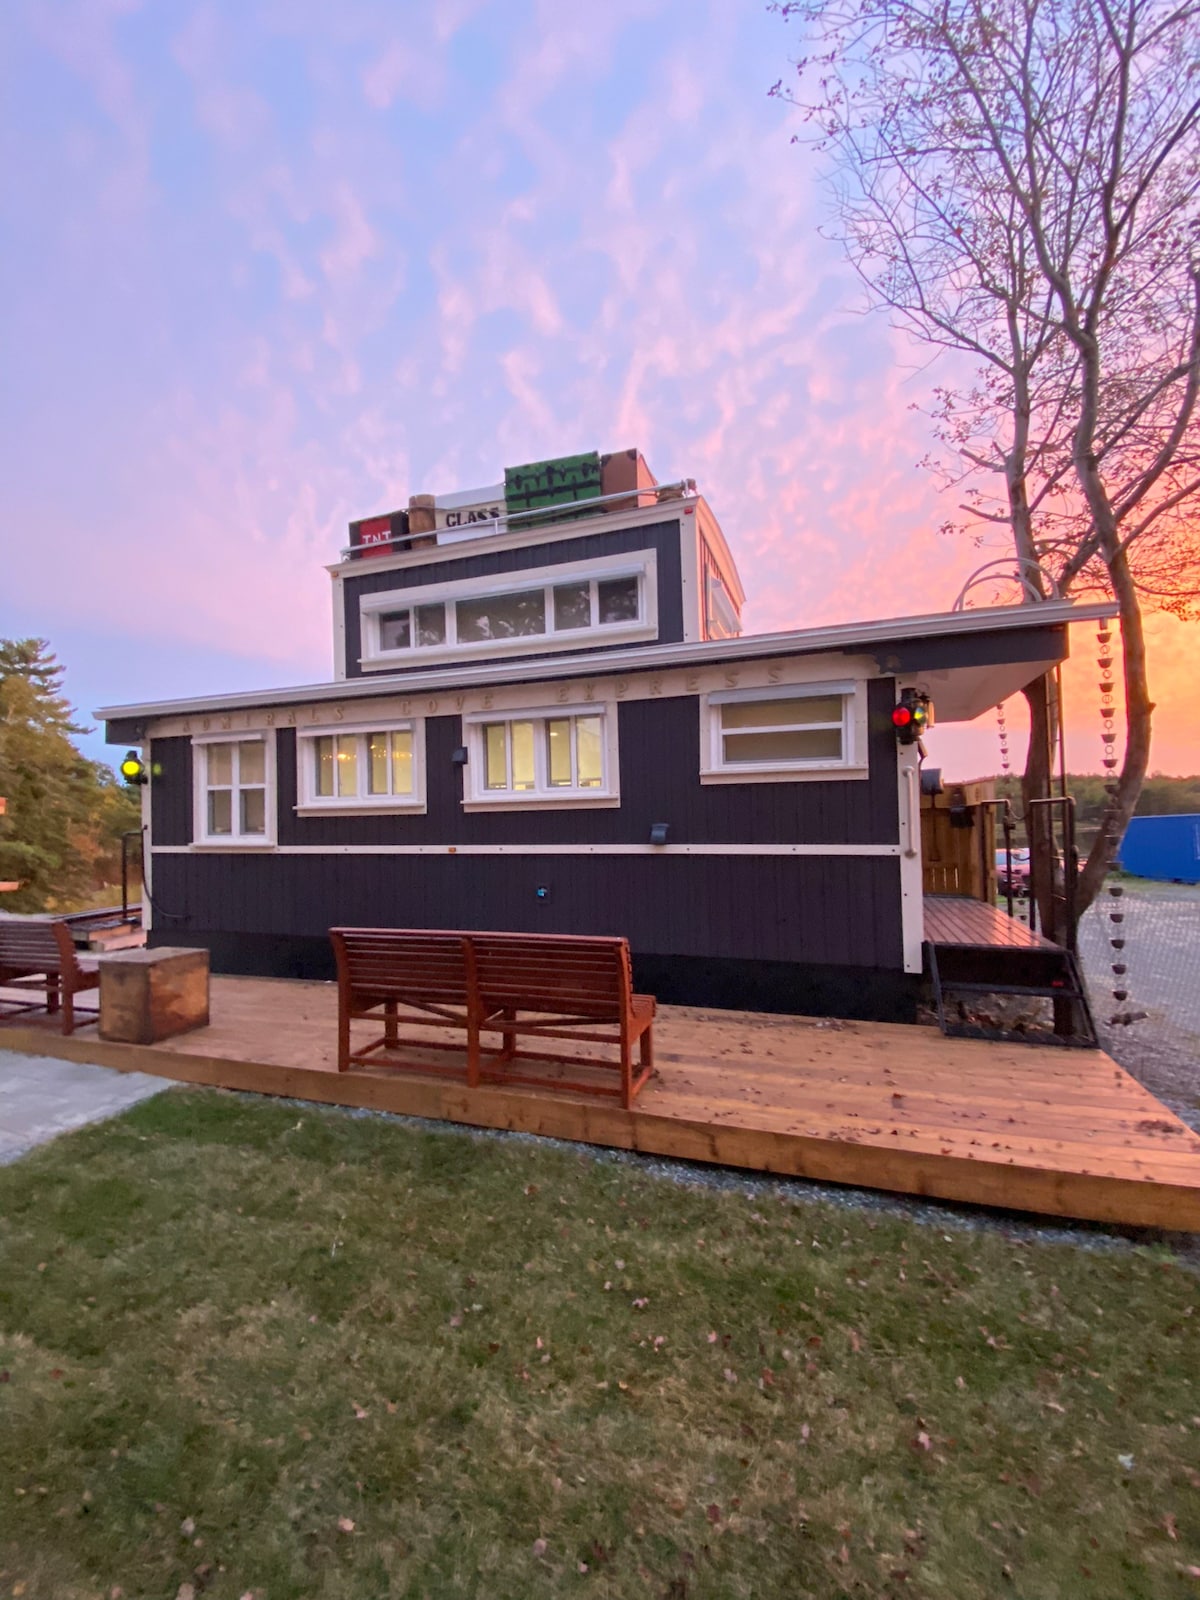 CNR featured Tiny Home Caboose in HRM!